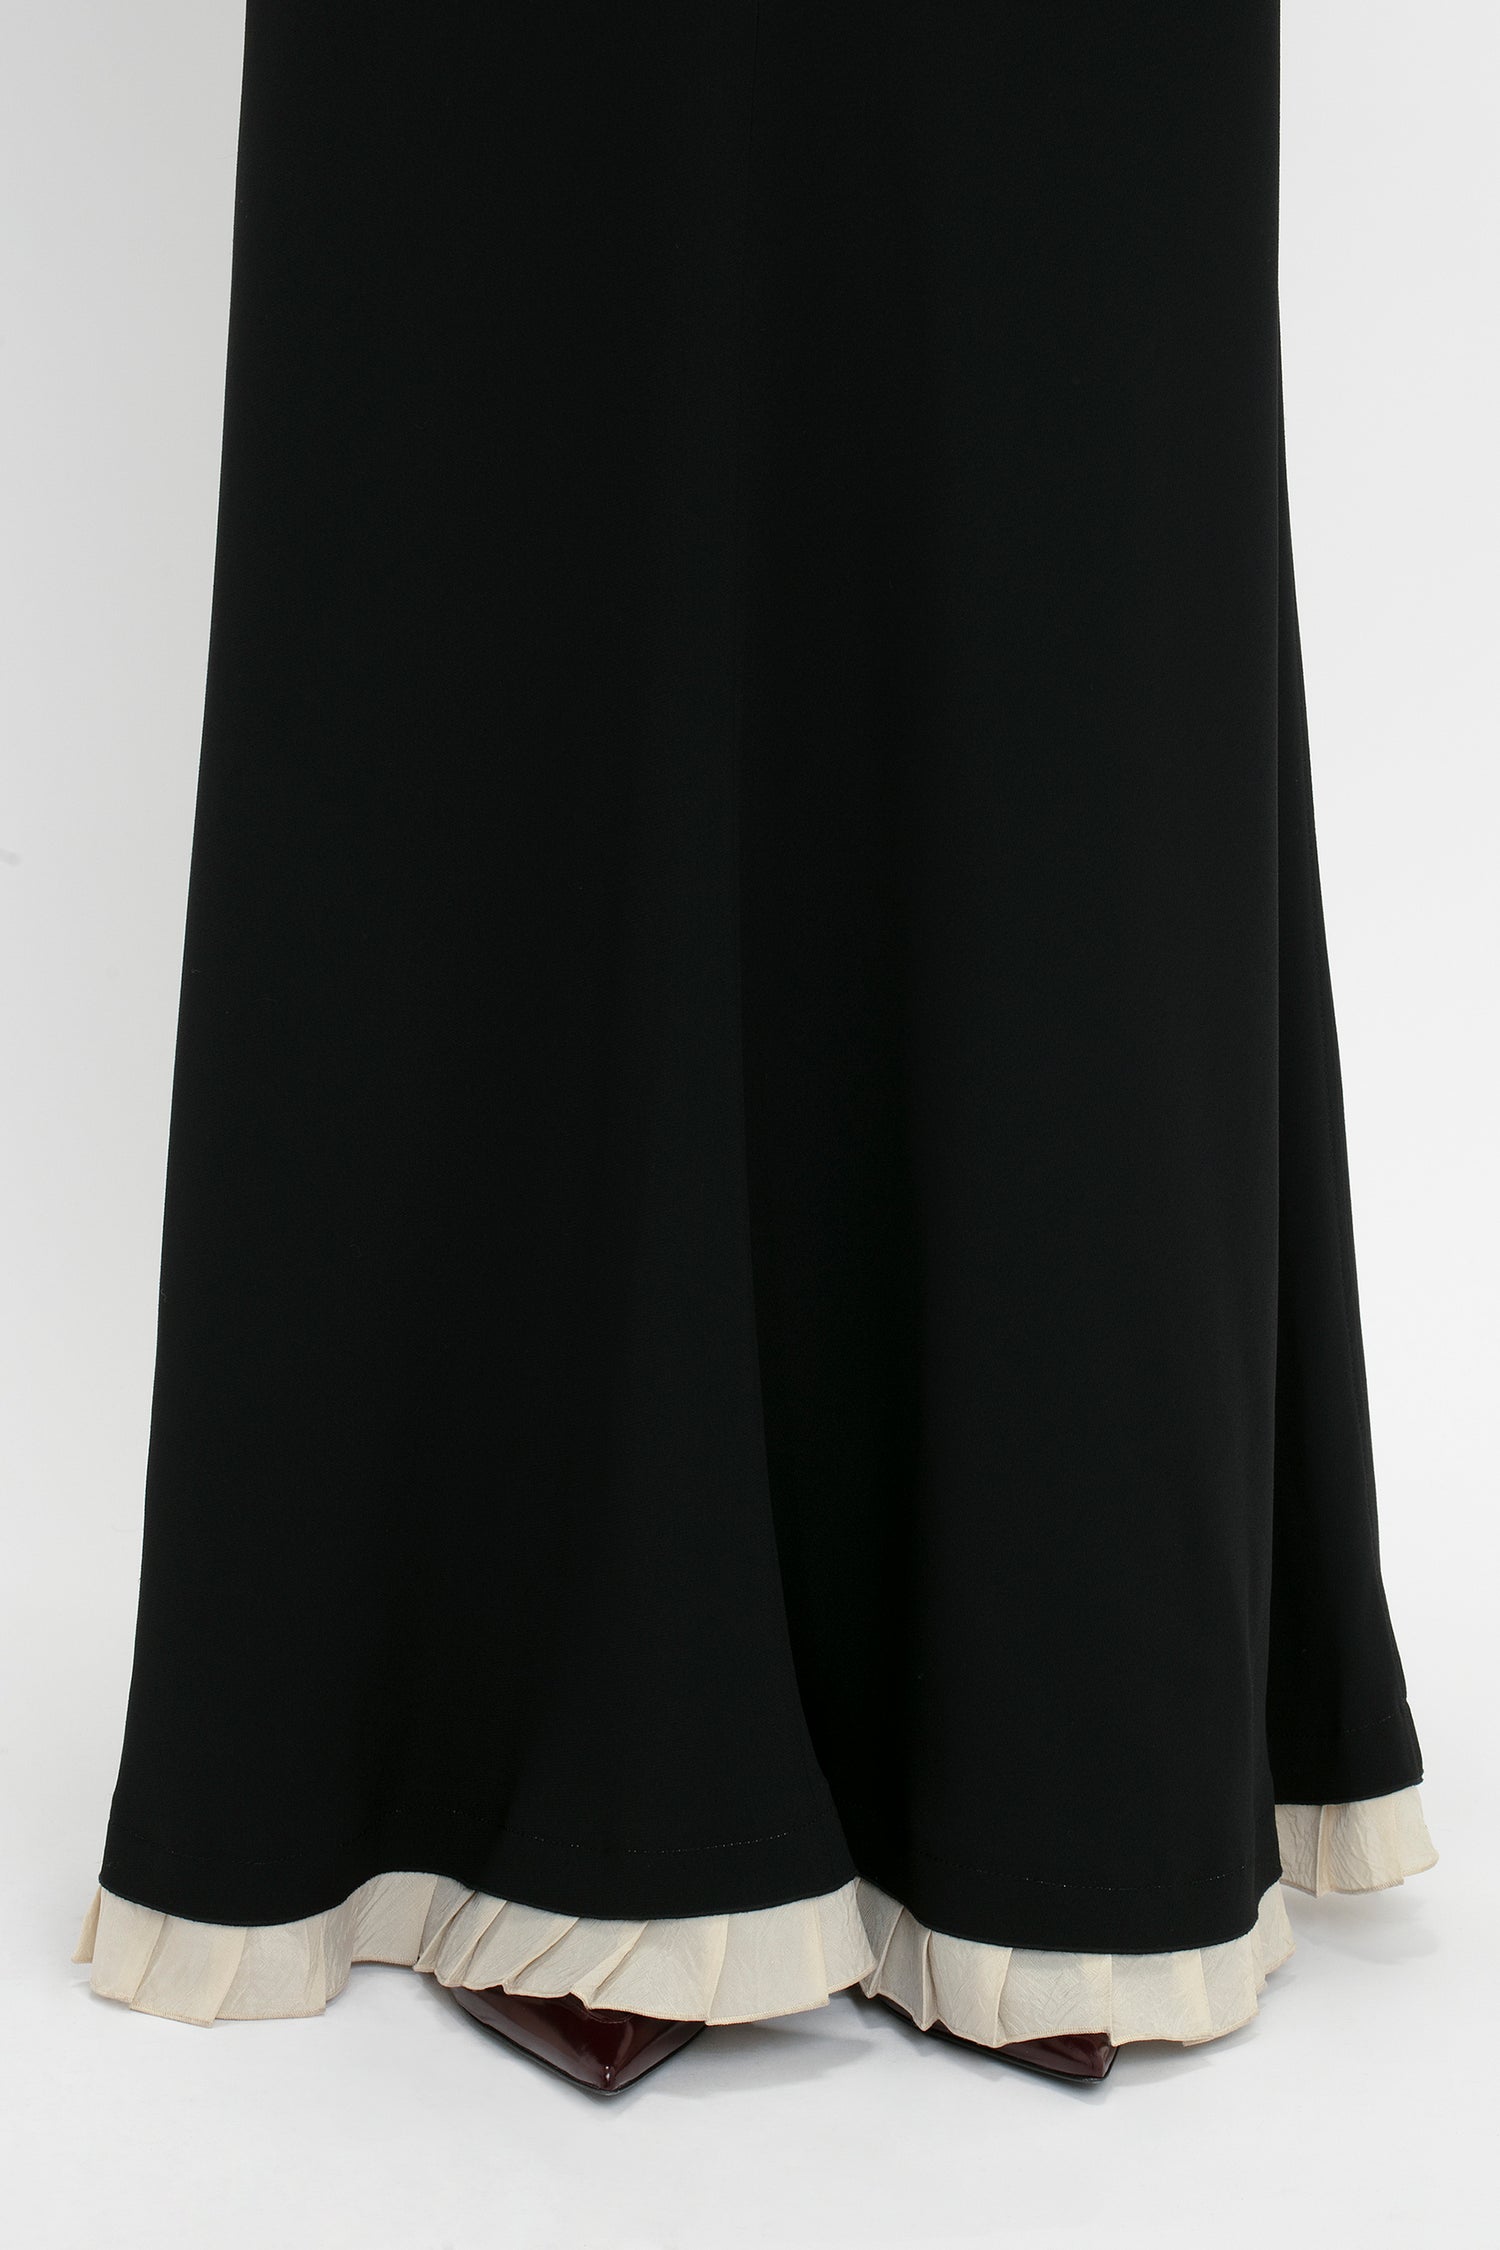 Close-up of the hem of a Victoria Beckham V-Neck Gathered Waist Floor-Length Gown In Black with a white frilled edge. The dress is floor-length and partially obstructs a pair of dark-colored shoes.